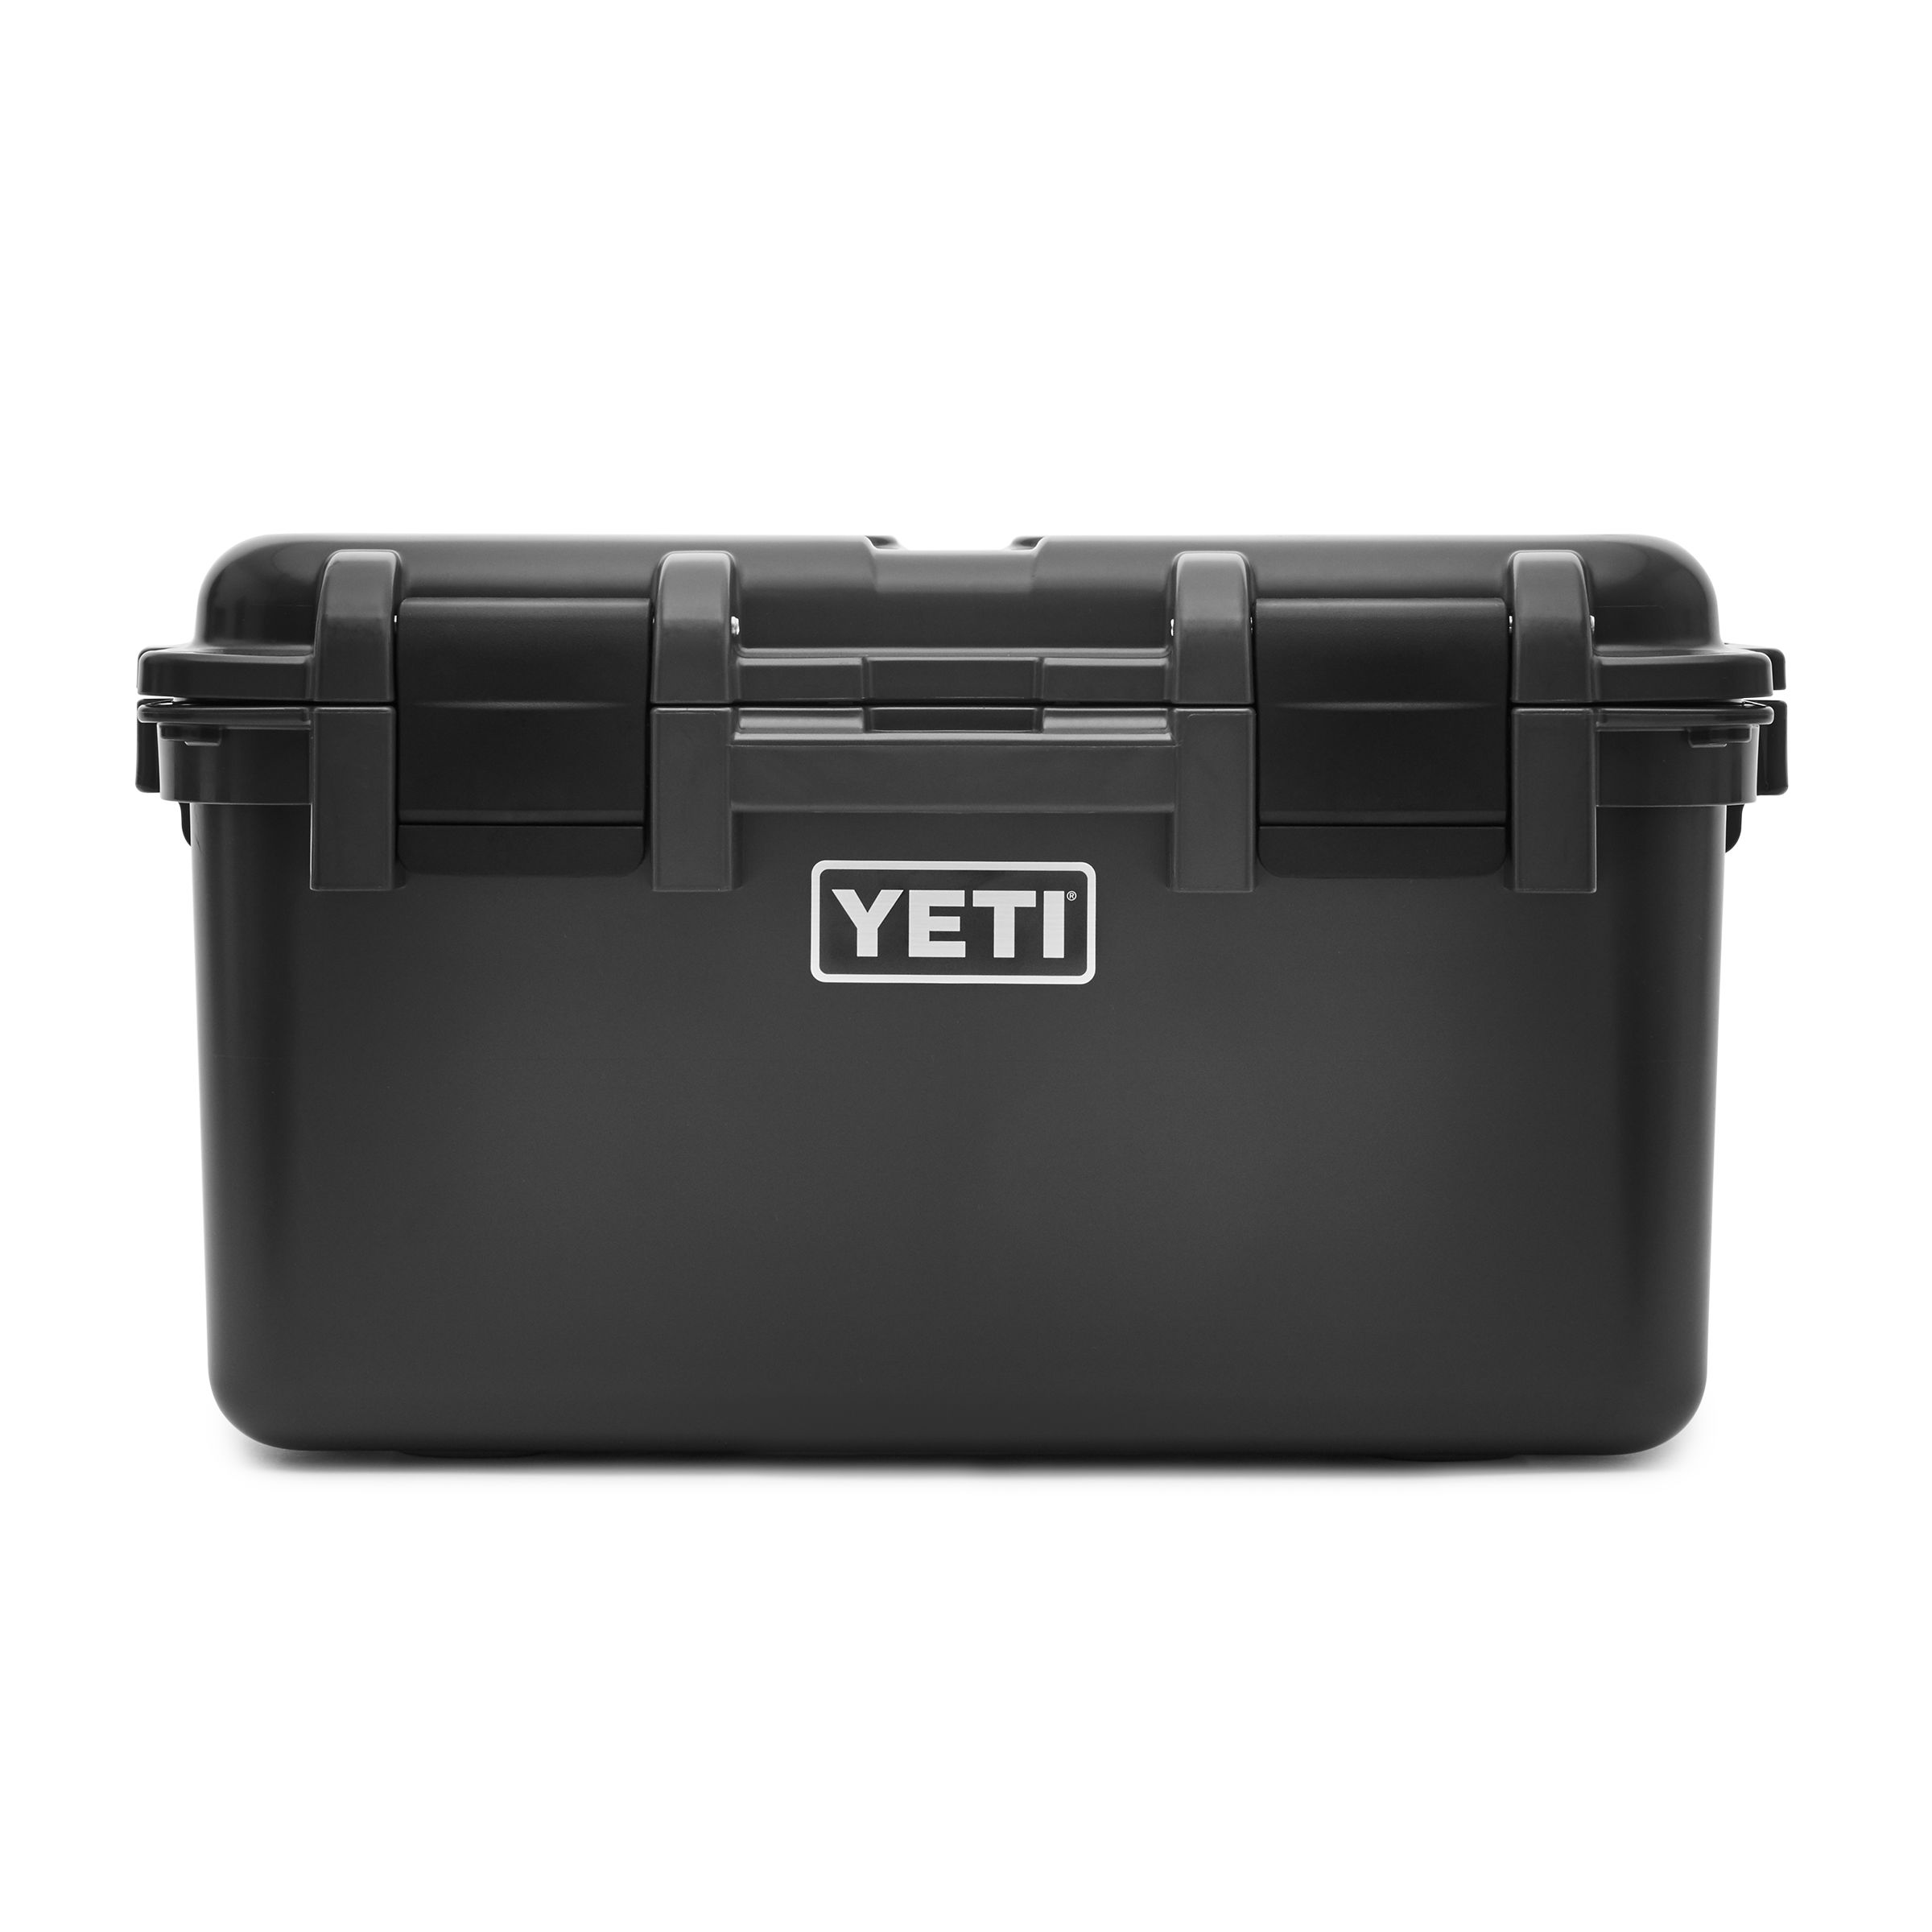 YETI clearance at Lowe's - GO GO GOOO! 🏃🏽💨 Click LINK IN BIO to